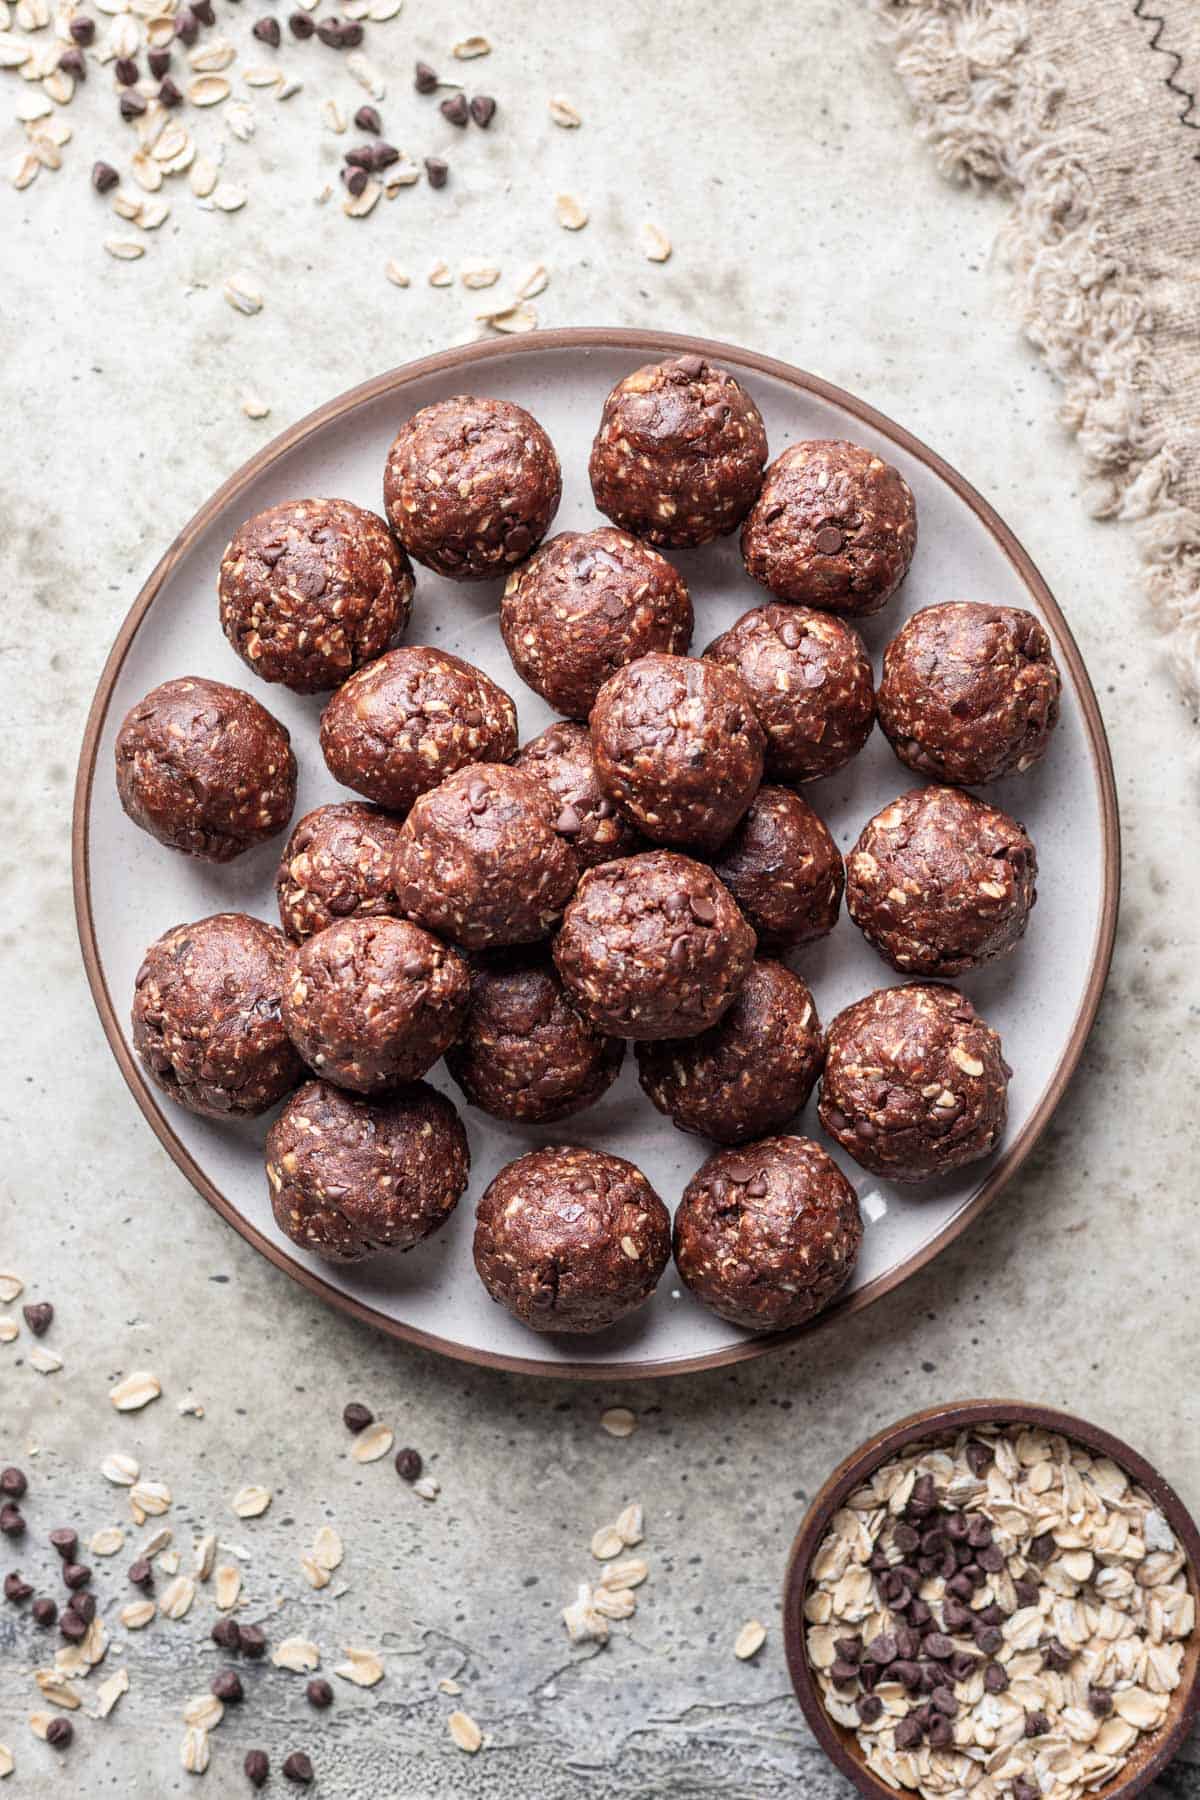 Chocolate date balls on a plate with oats and chocolate chips scattered around it.